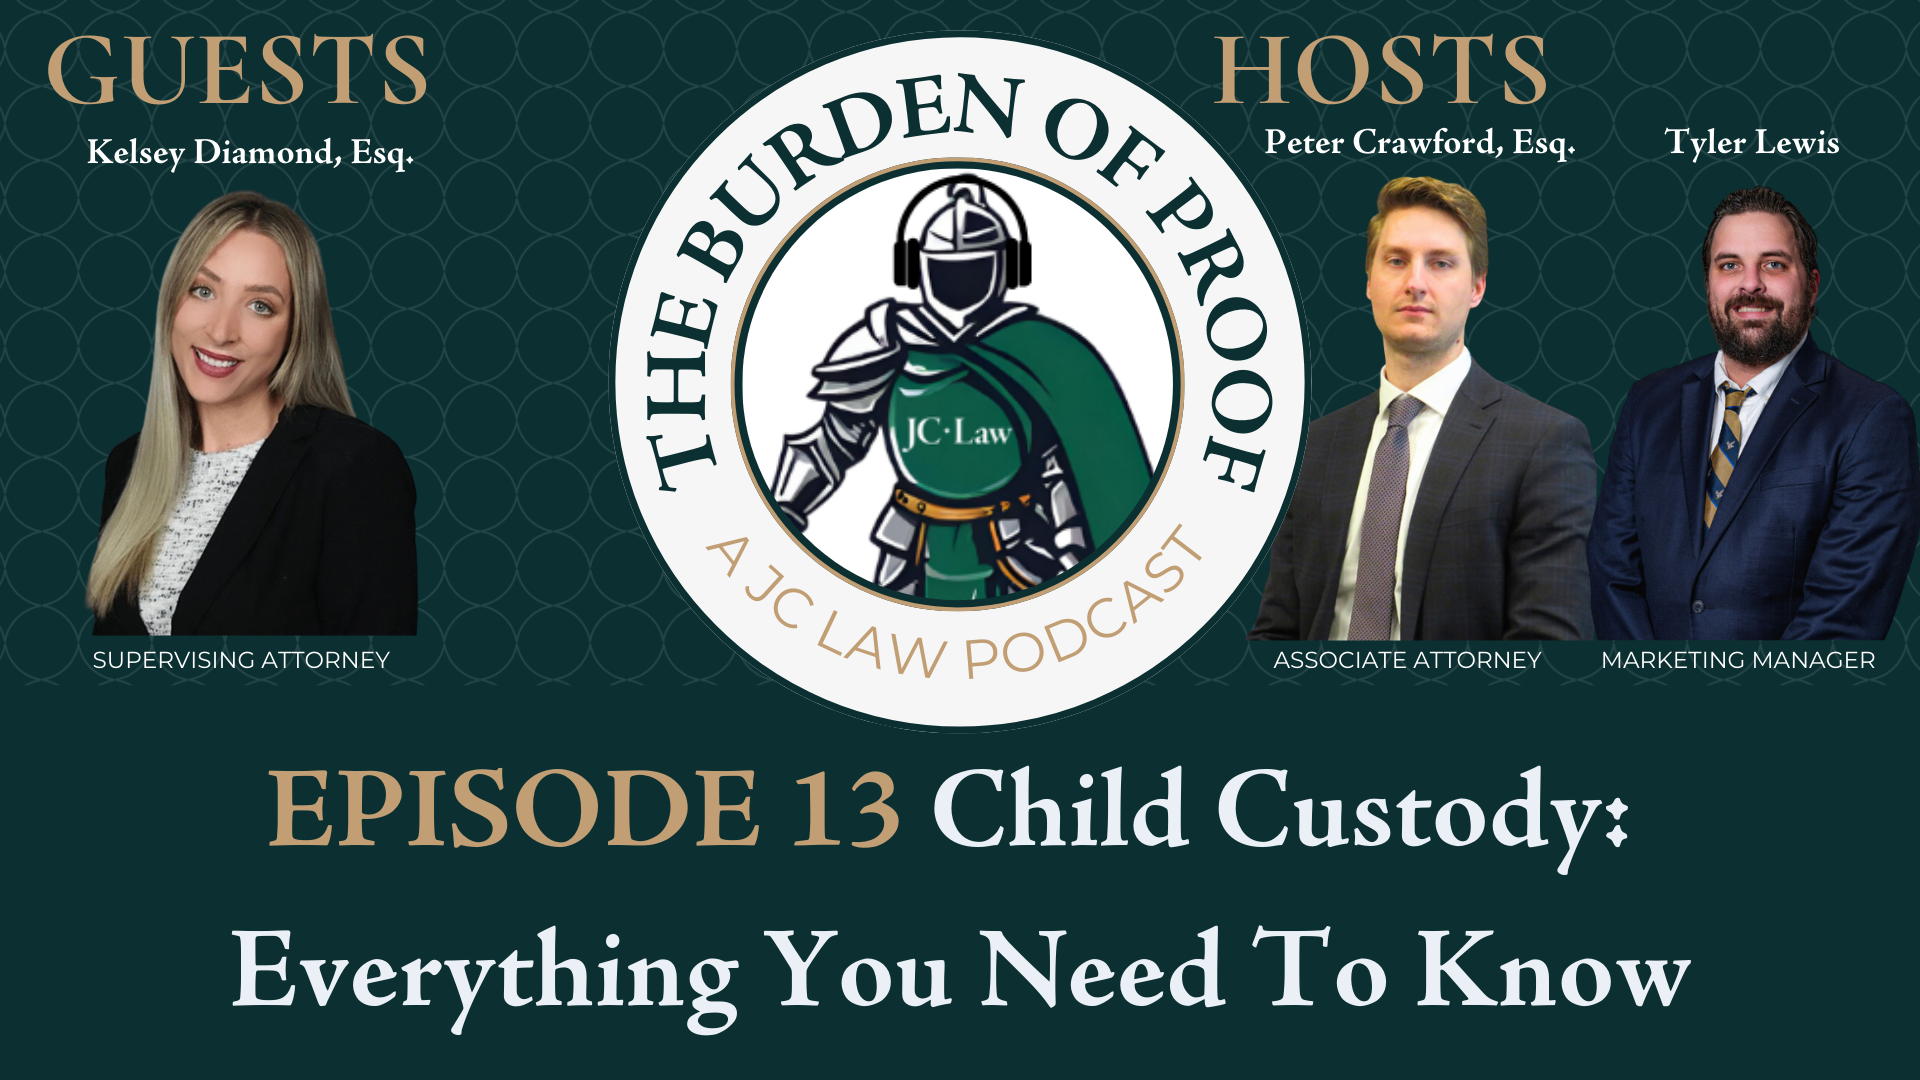 Episode 13 Child Custody: Everything You Need To Know